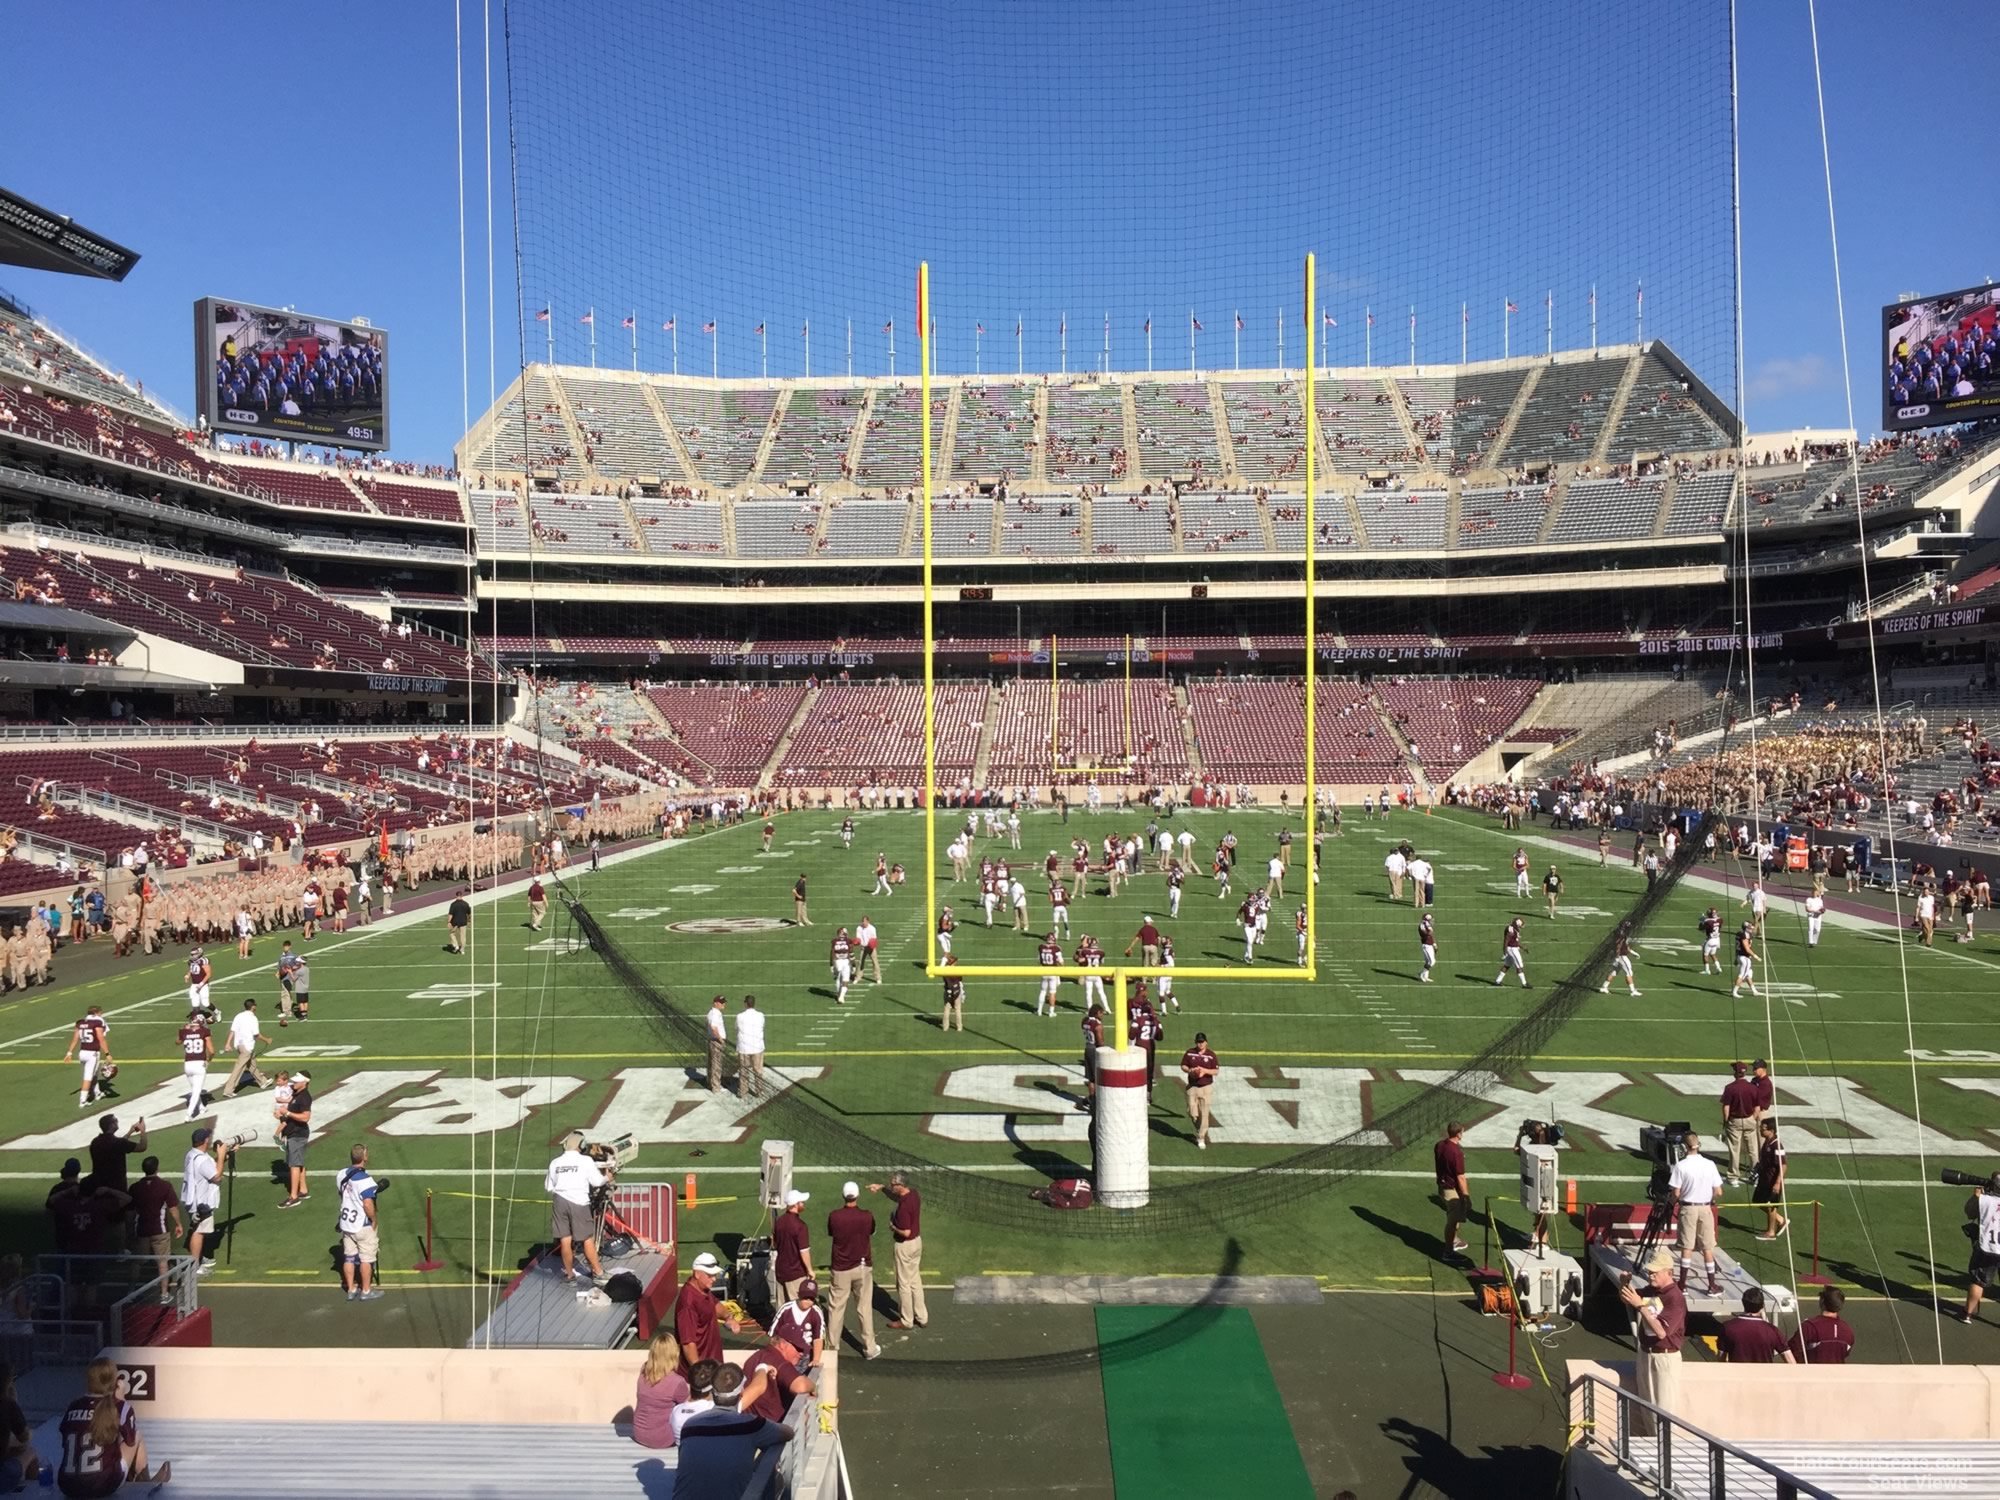 section 132, row 20 seat view  - kyle field